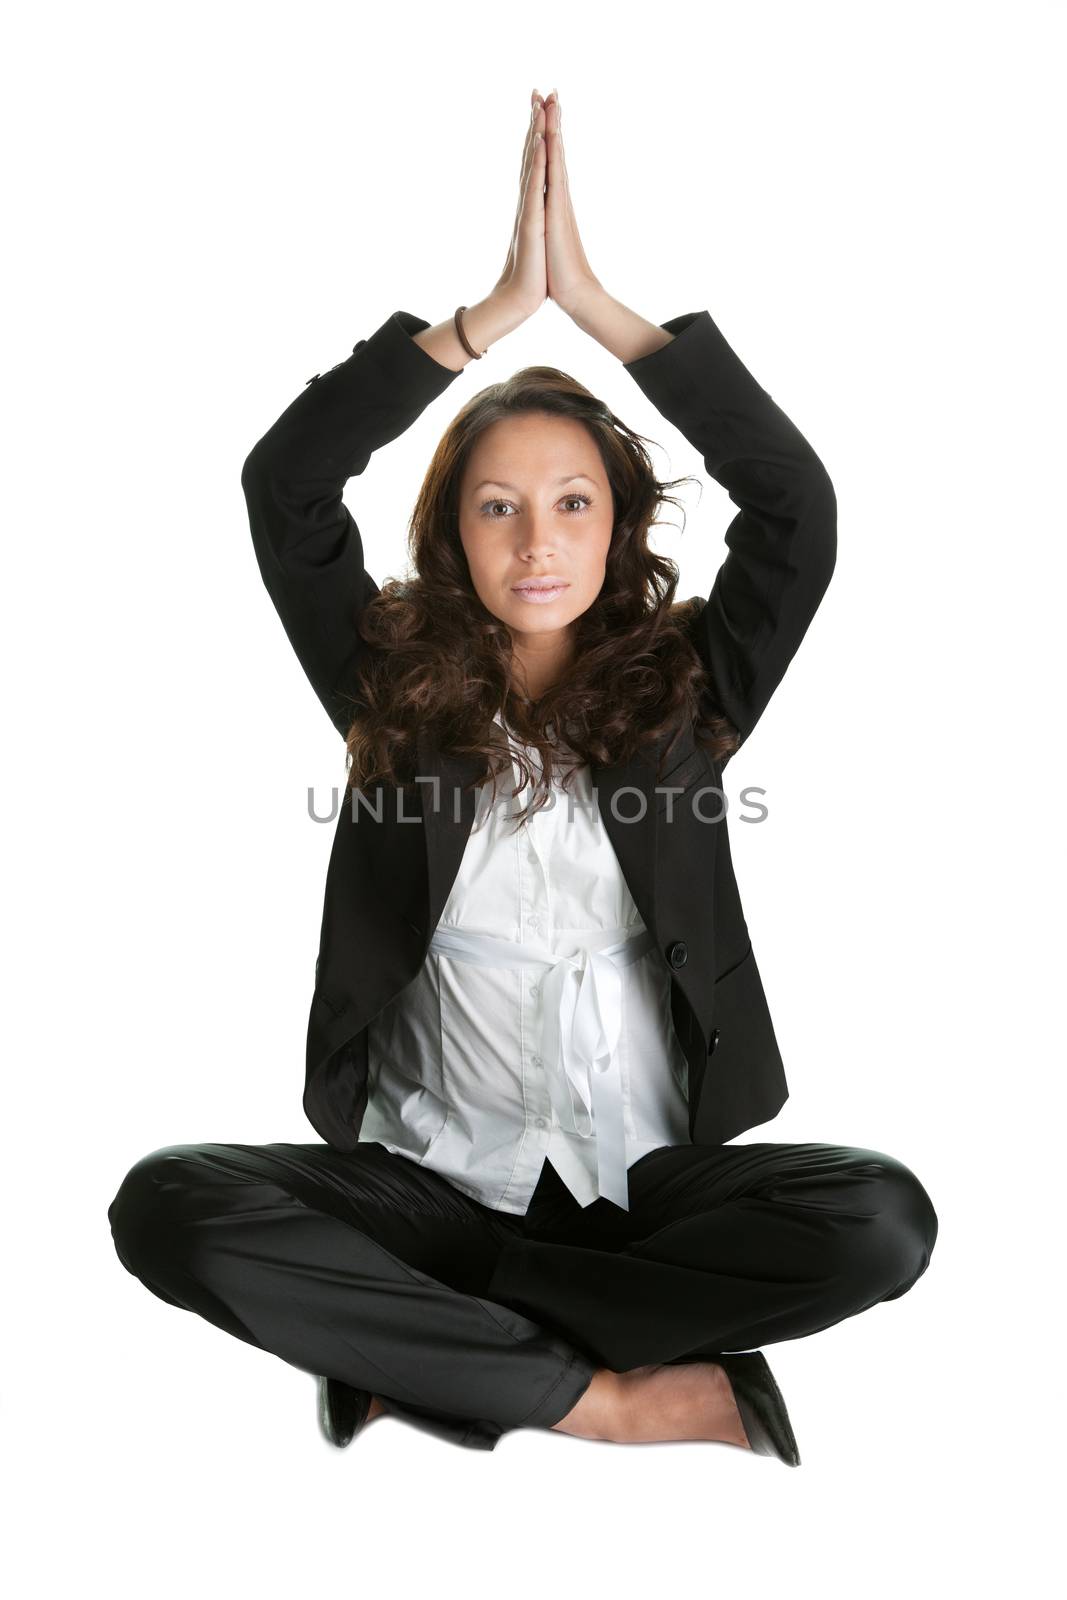 Businesswoman sitting in lotus flower position of yoga. Isolated on white